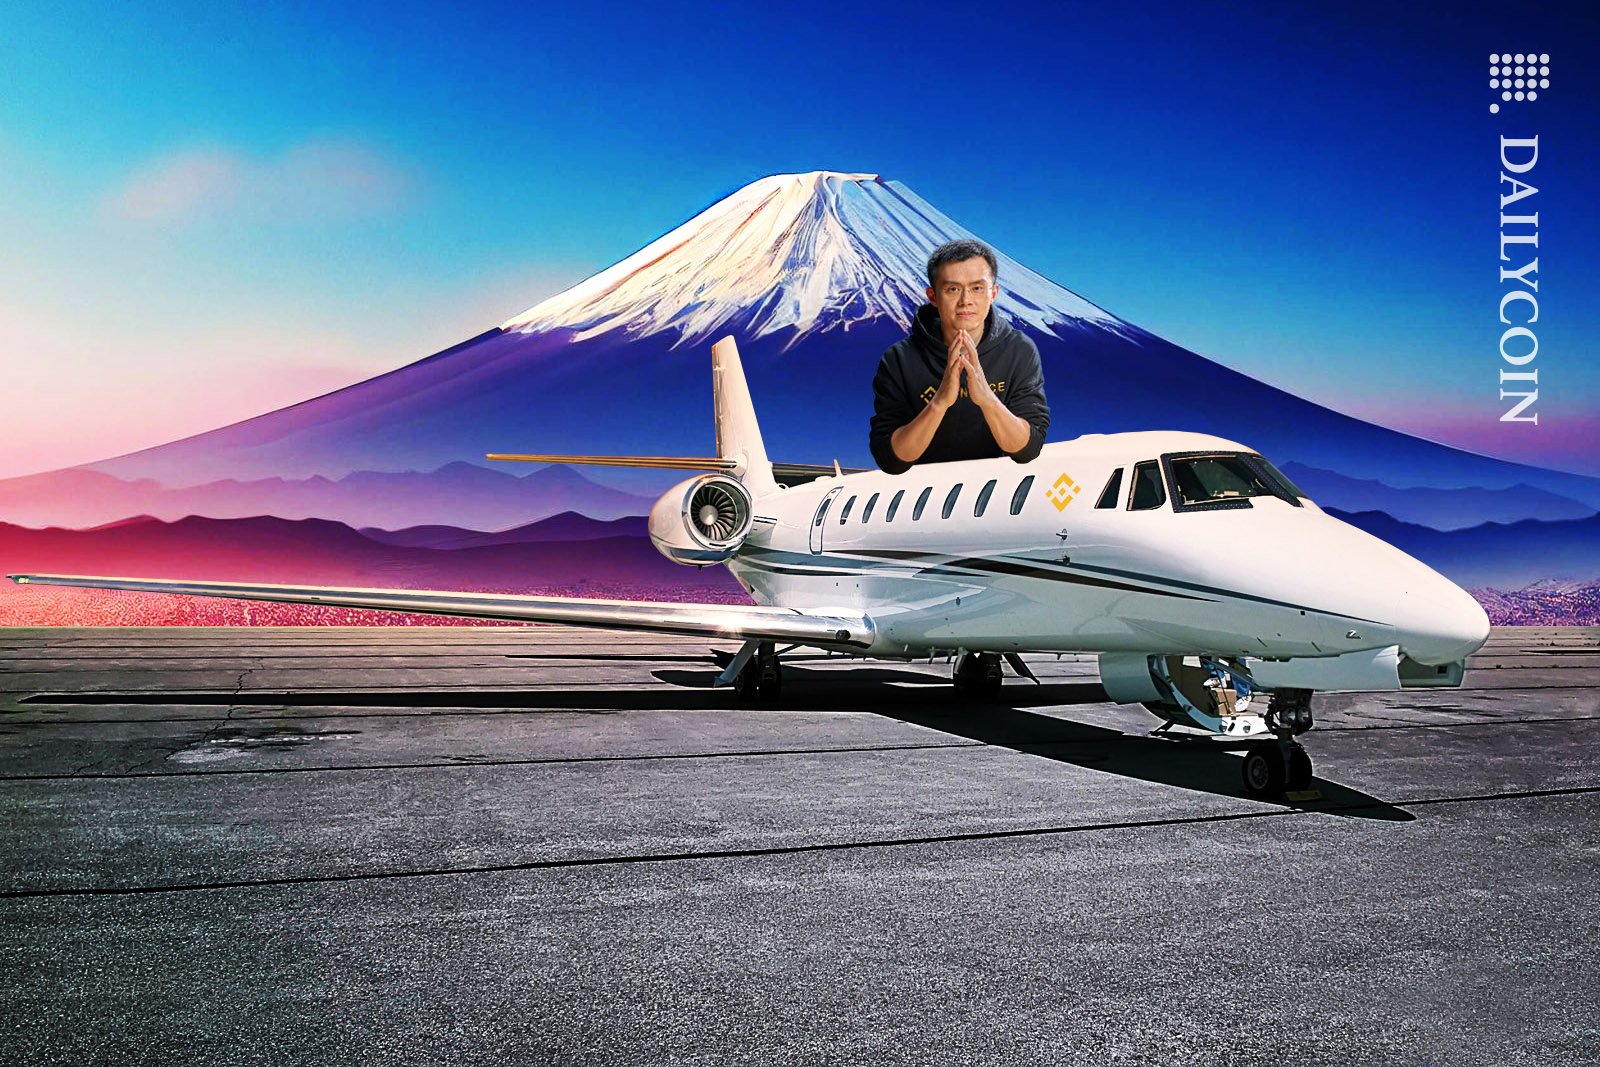 Changpeng Zhao resting on his private jet on a Japanese runway.